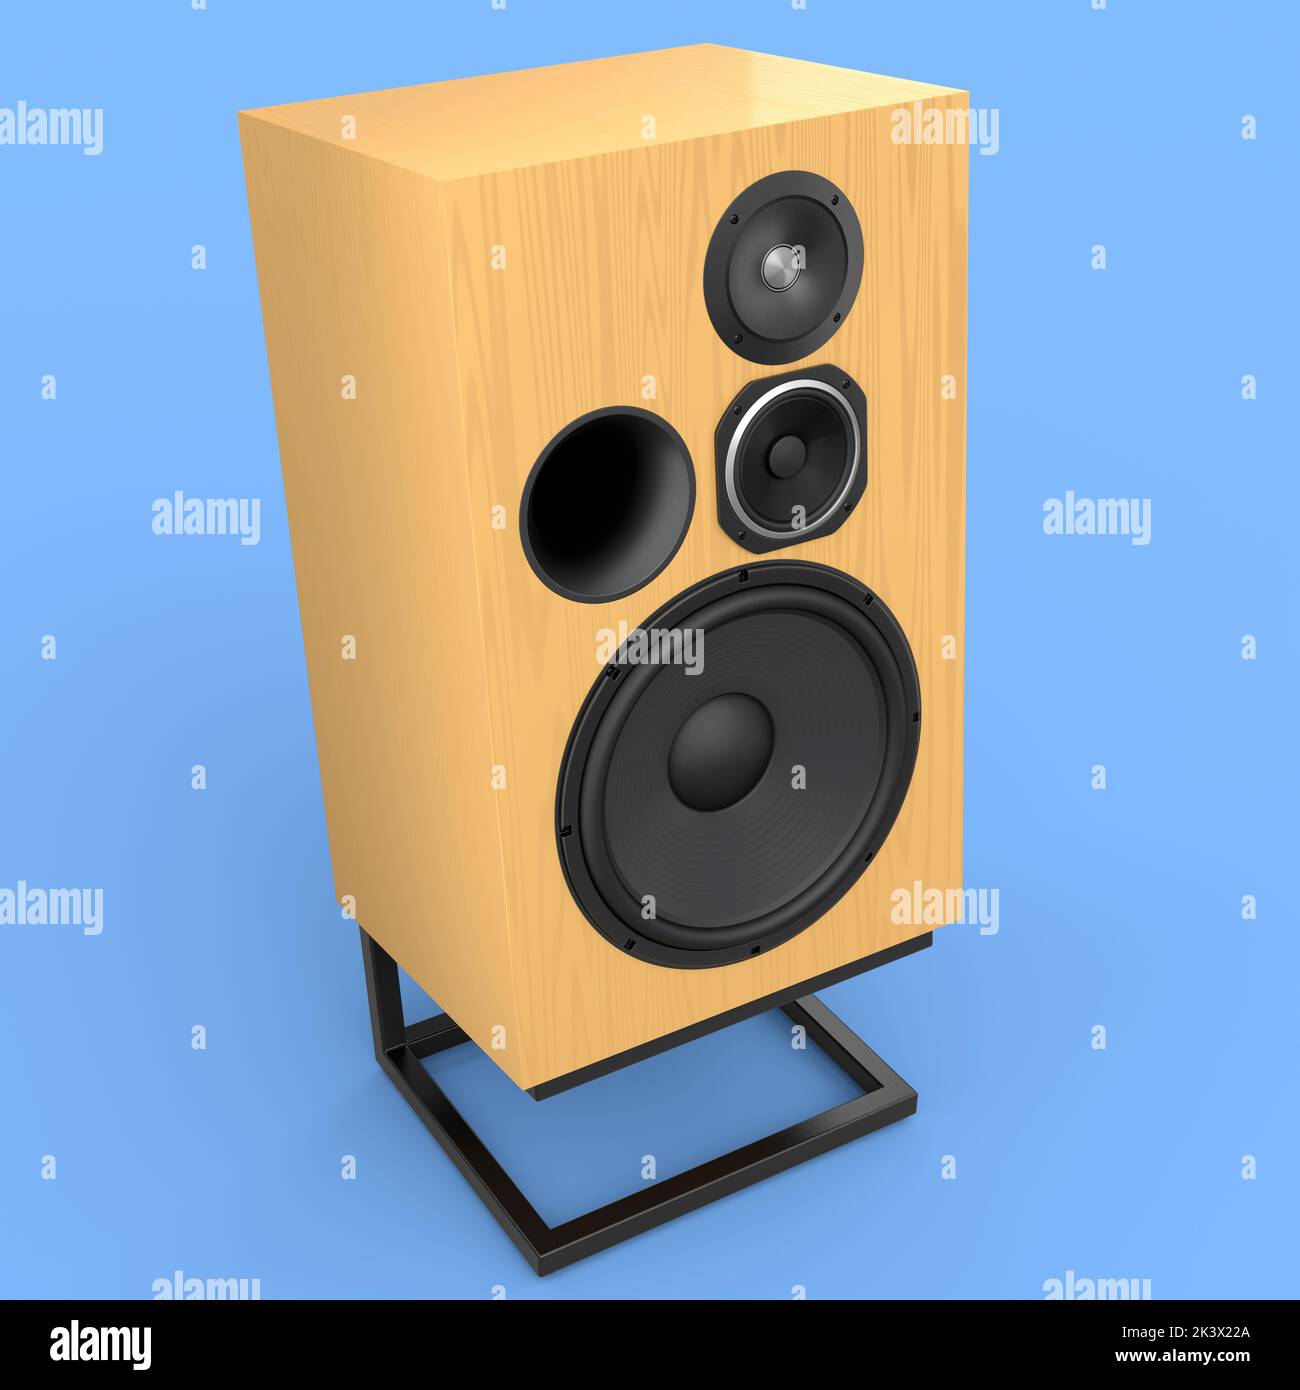 Hi-fi speakers with loudspeakers on stand isolated on blue background. 3d render audio equipment like boombox for sound recording studio Stock Photo